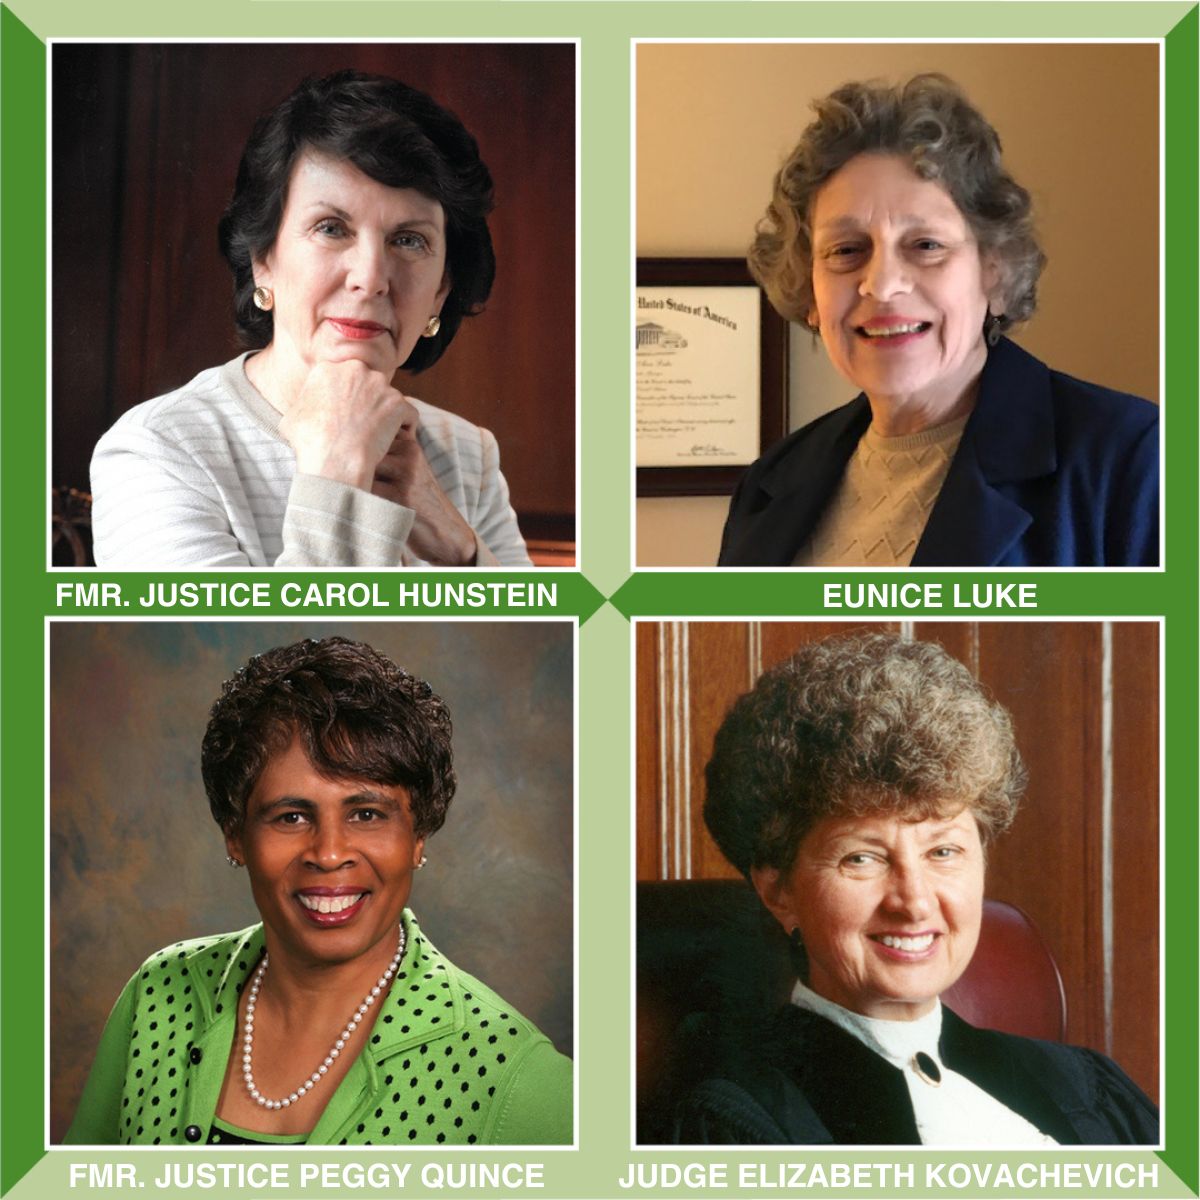 Today is #InternationalWomensDay, when we celebrate the contributions of women everywhere - including Stetson Law. Read about four of Stetson Law's women trailblazers: tinyurl.com/5b63xbr6 - and see how we celebrate Women's History Month: tinyurl.com/4fs3z8cd